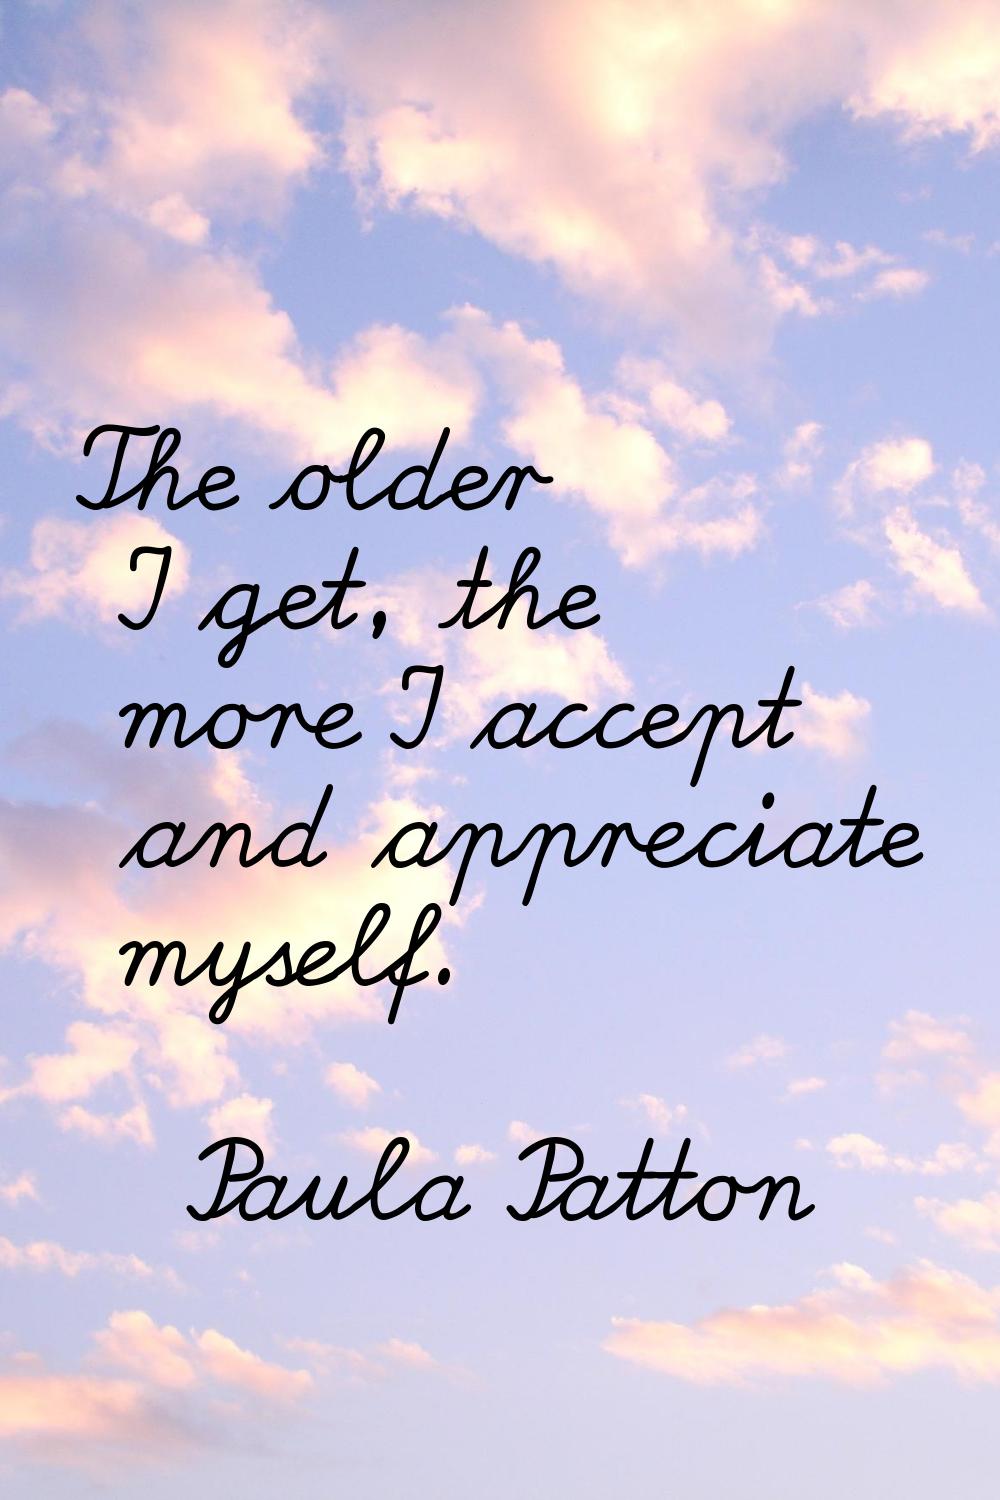 The older I get, the more I accept and appreciate myself.